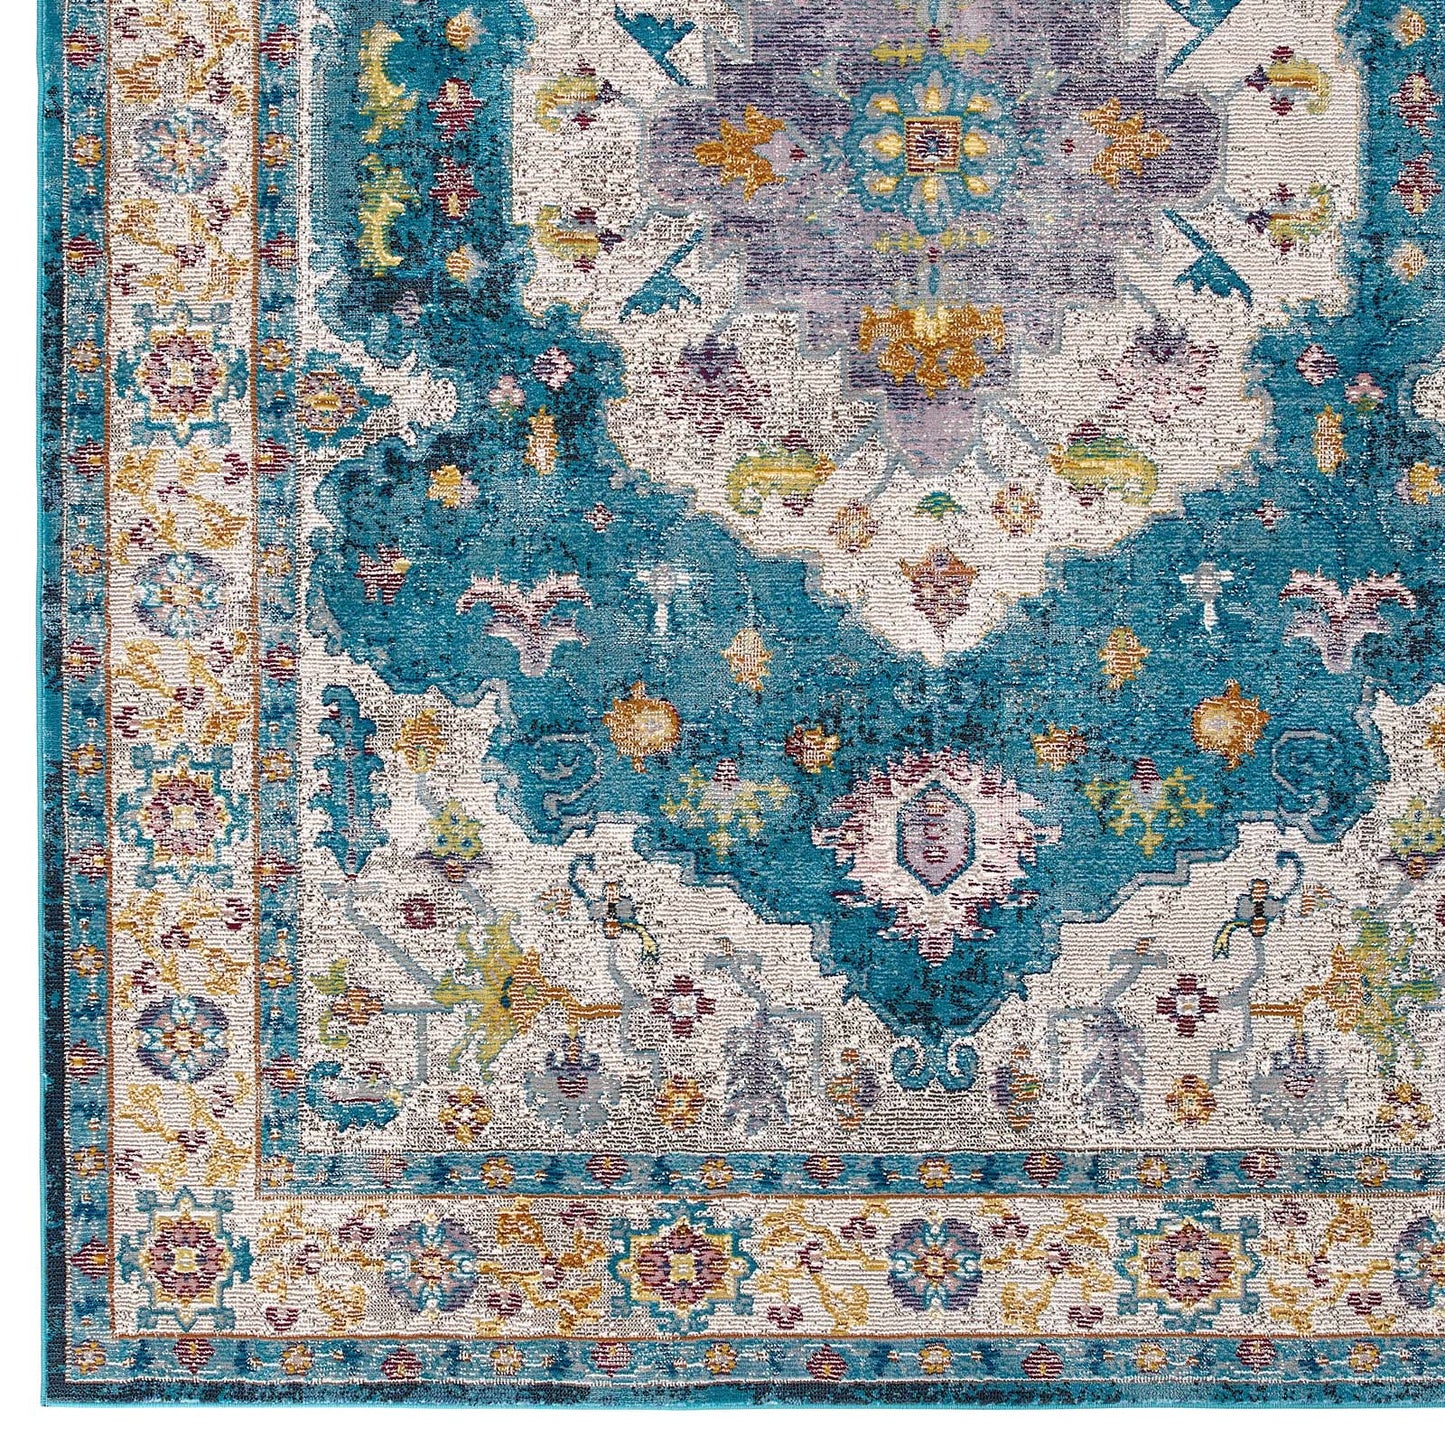 Success Anisah Distressed Floral Persian Medallion 4x6 Area Rug Blue, Ivory, Yellow, Orange R-1163C-46